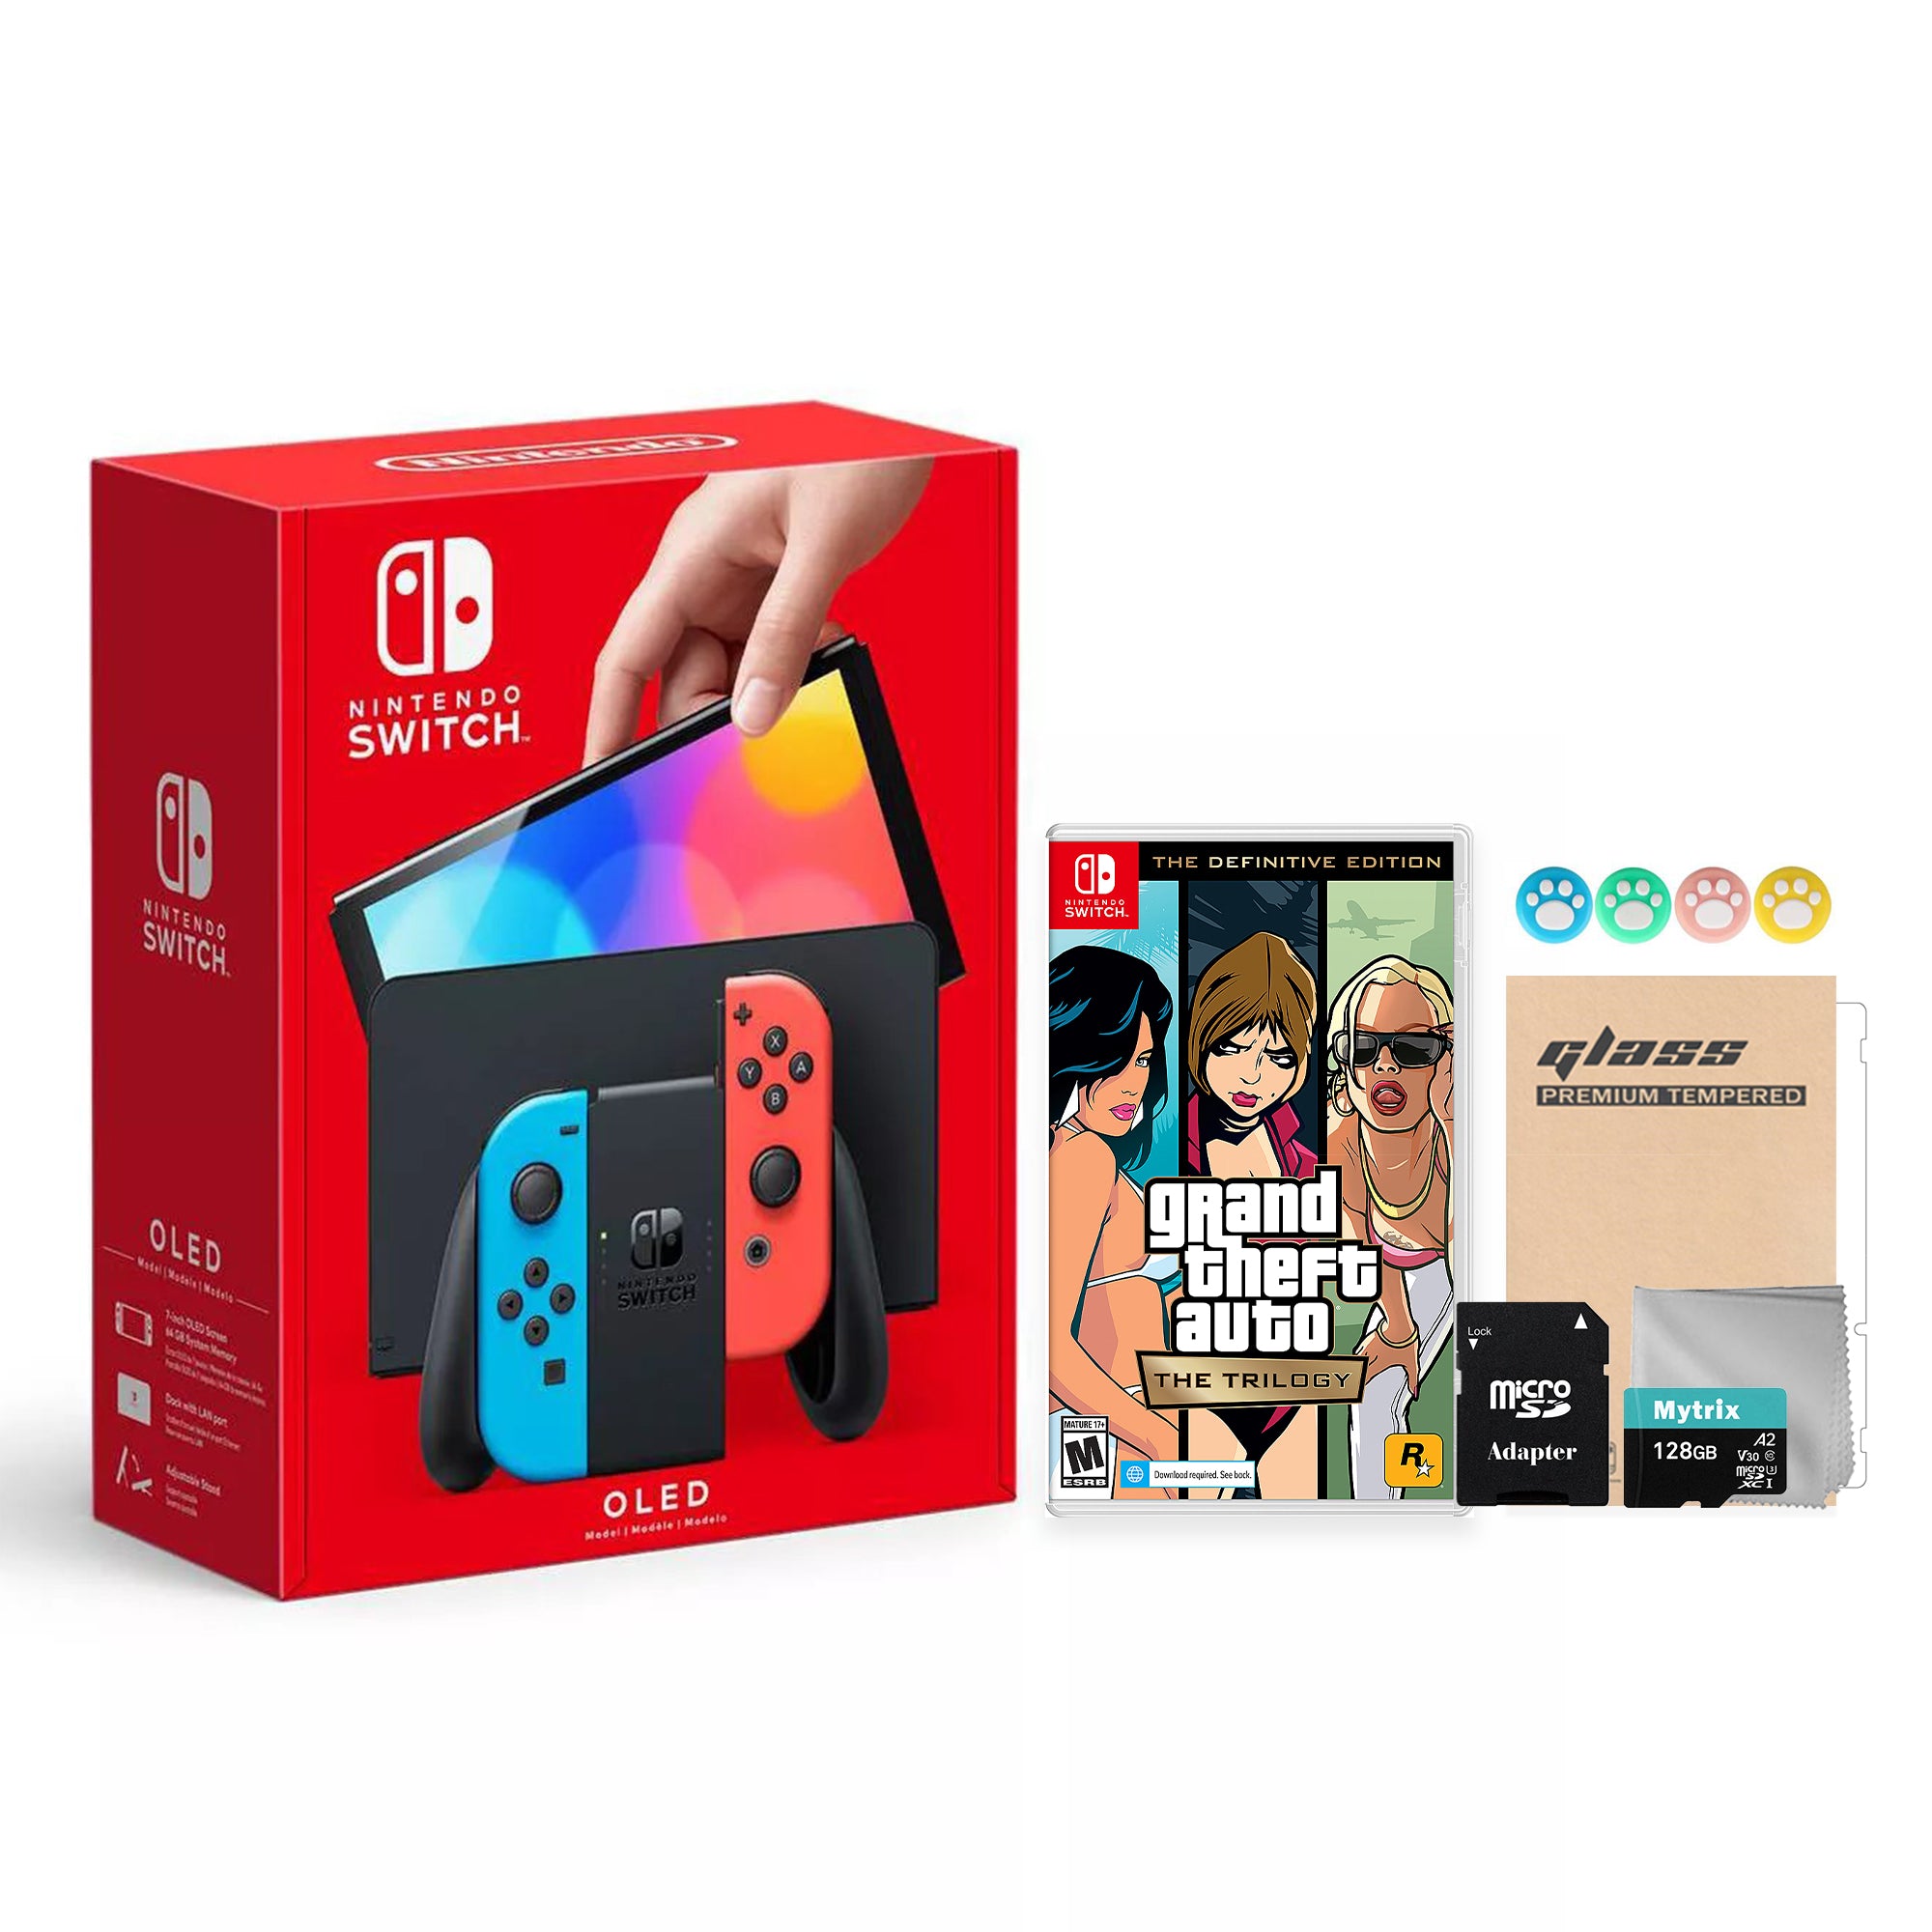 2022 New Nintendo Switch OLED Model Neon Red Blue Joy Con 64GB Console Improved HD Screen & LAN-Port Dock with Grand Theft Auto: The Trilogy, Mytrix 128GB MicroSD Card and Accessories